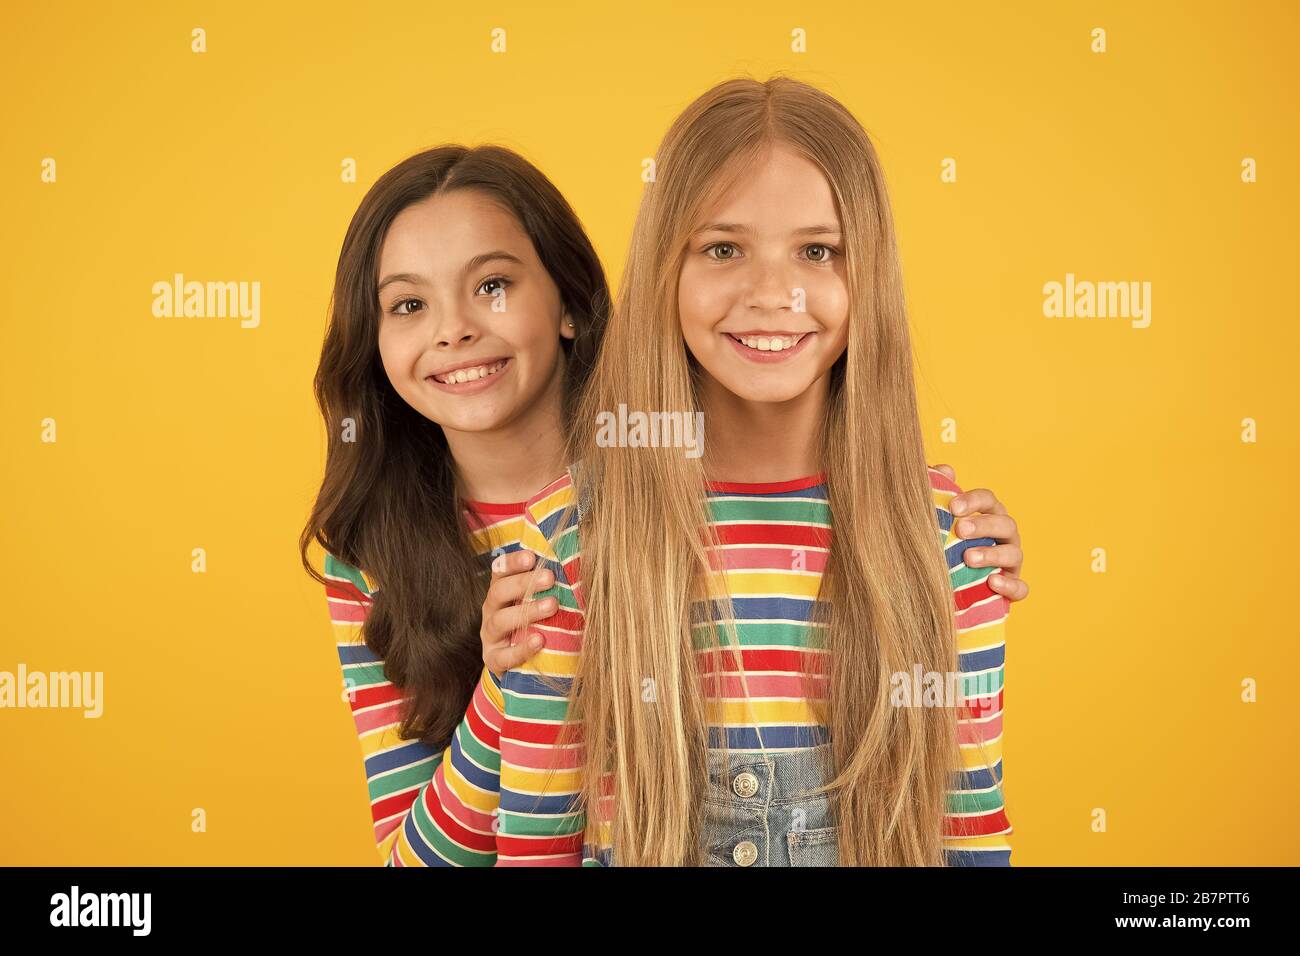 Children are the future. Happy children with long hair yellow background. Small children in casual style. Little children cute smiling. International childrens day. Stock Photo